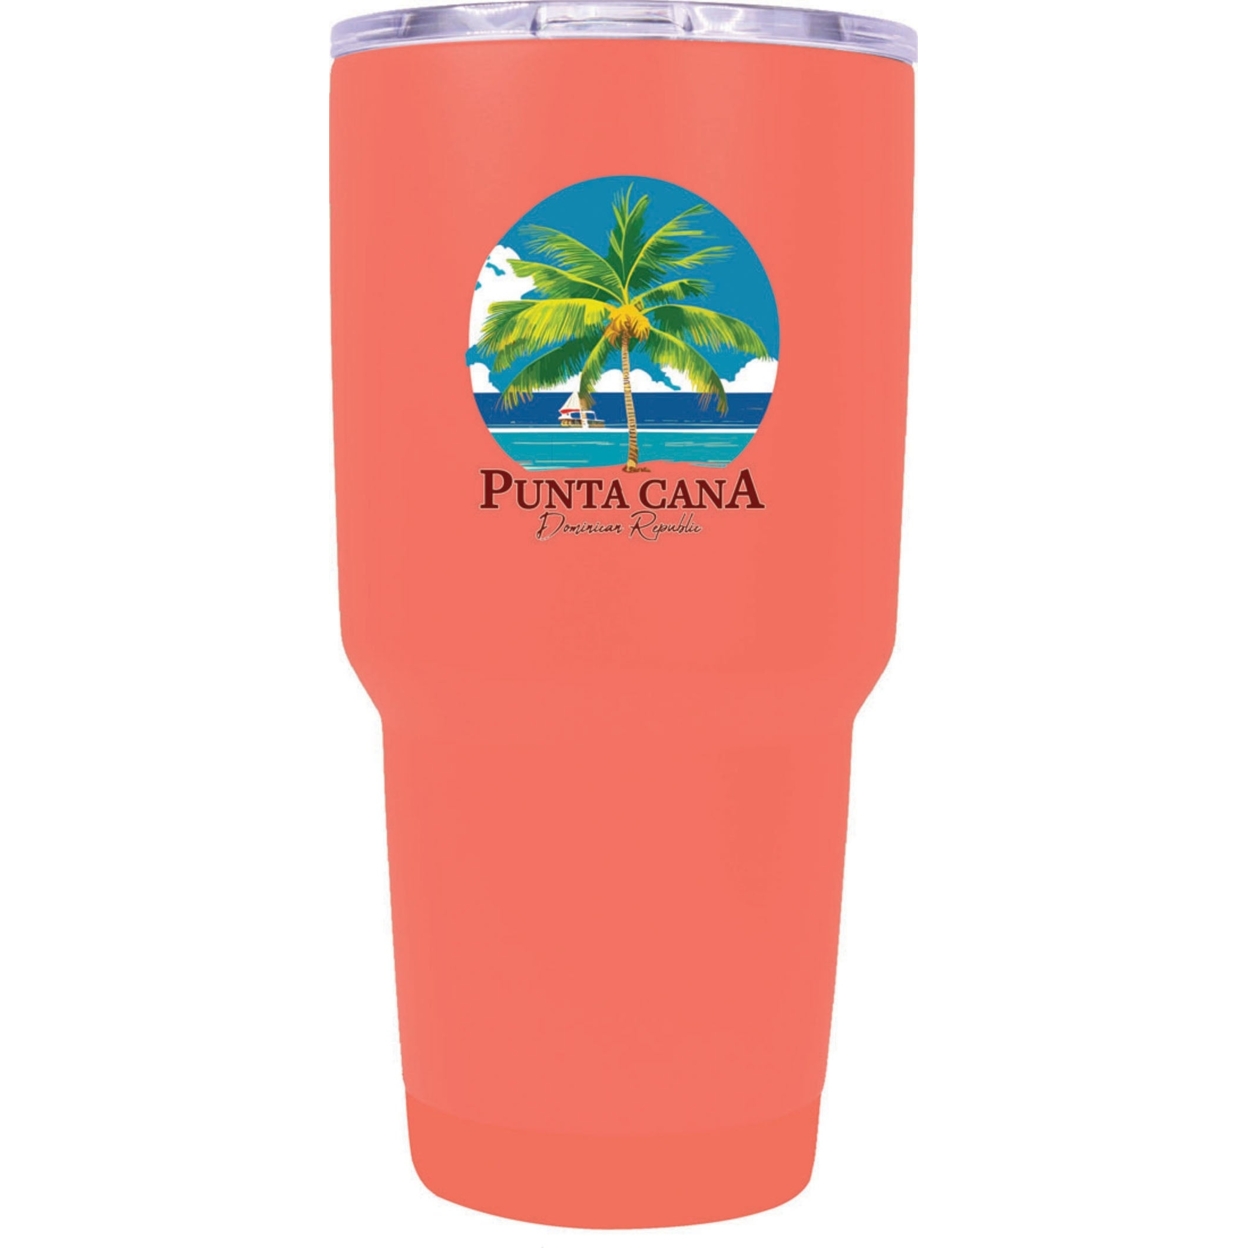 Punta Cana Dominican Republic Souvenir 24 Oz Insulated Stainless Steel Tumbler - Coral, PALM